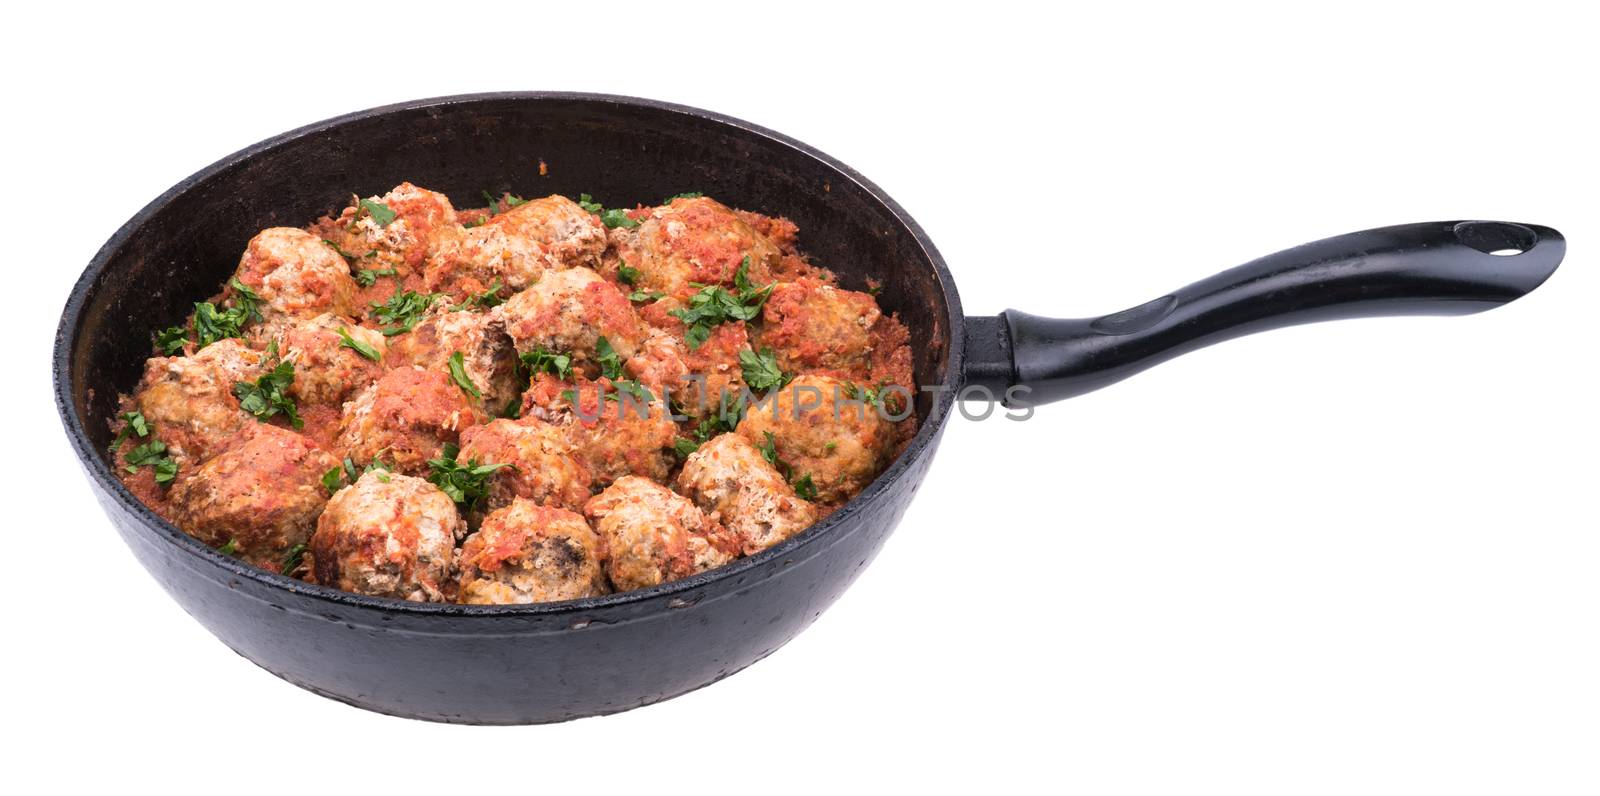 Stewed meatballs in a pan isolated on white background. Selective focus.